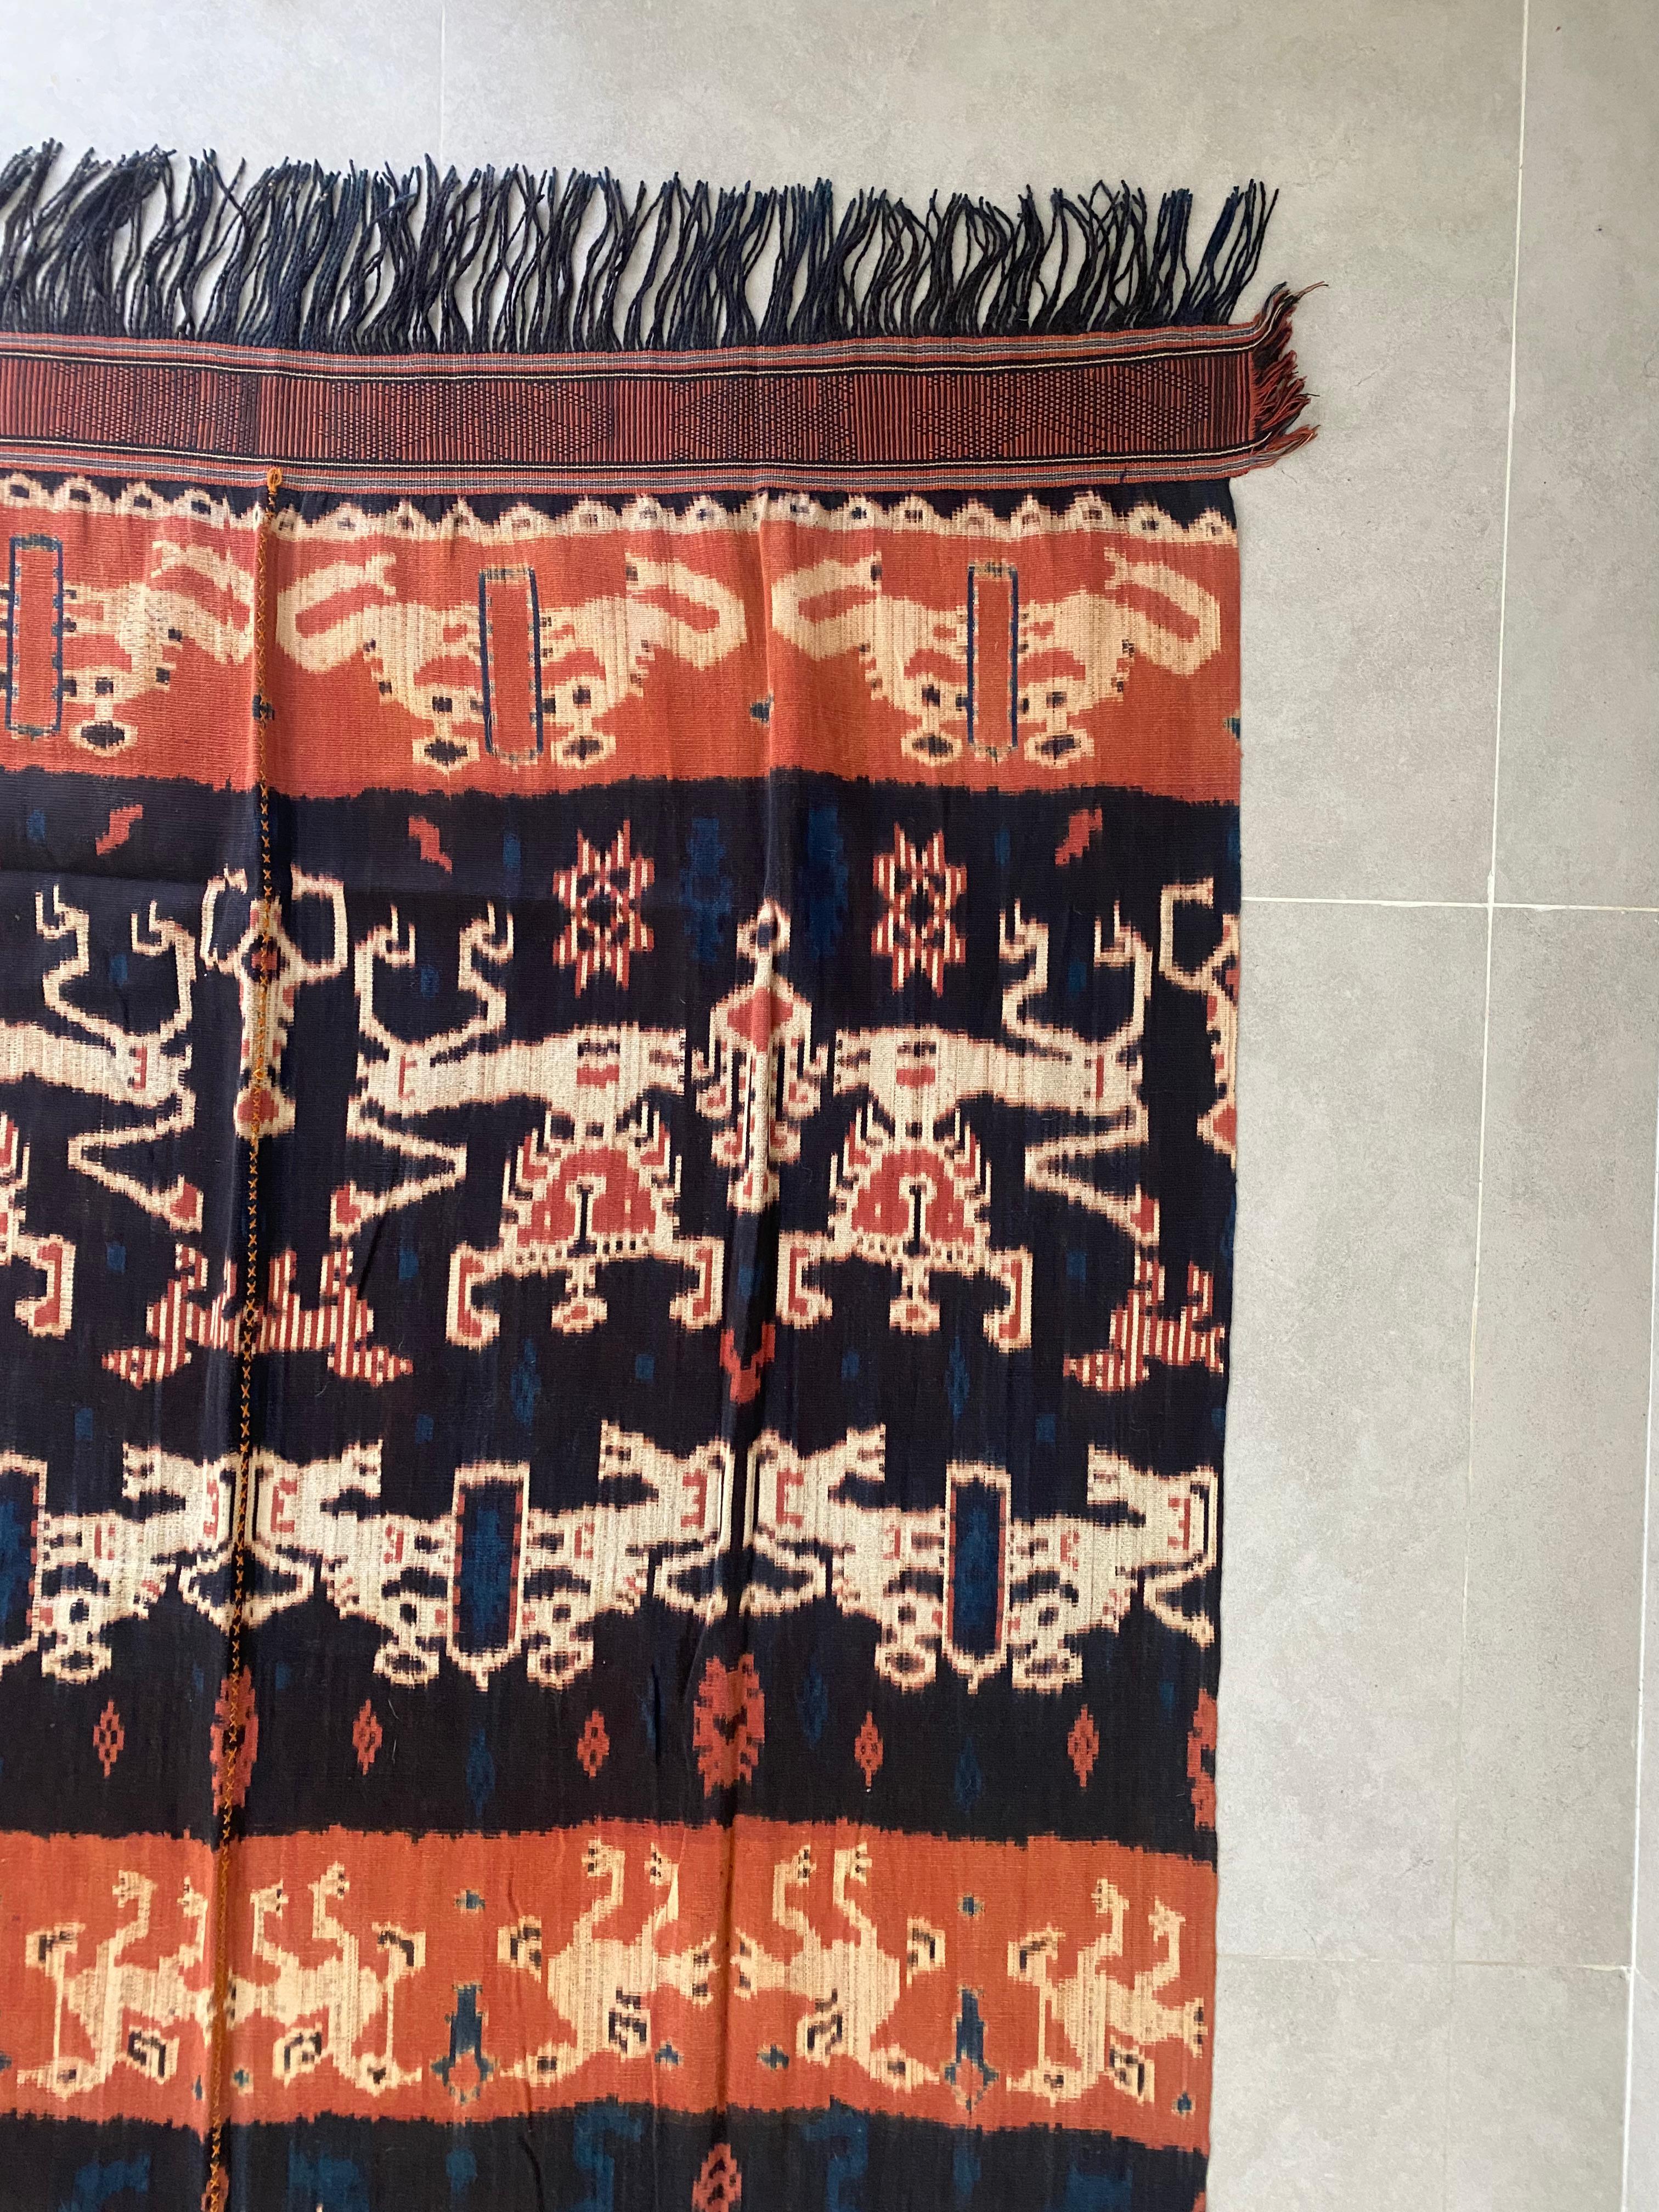 Hand-Woven Ikat Textile from Sumba Island, Indonesia For Sale